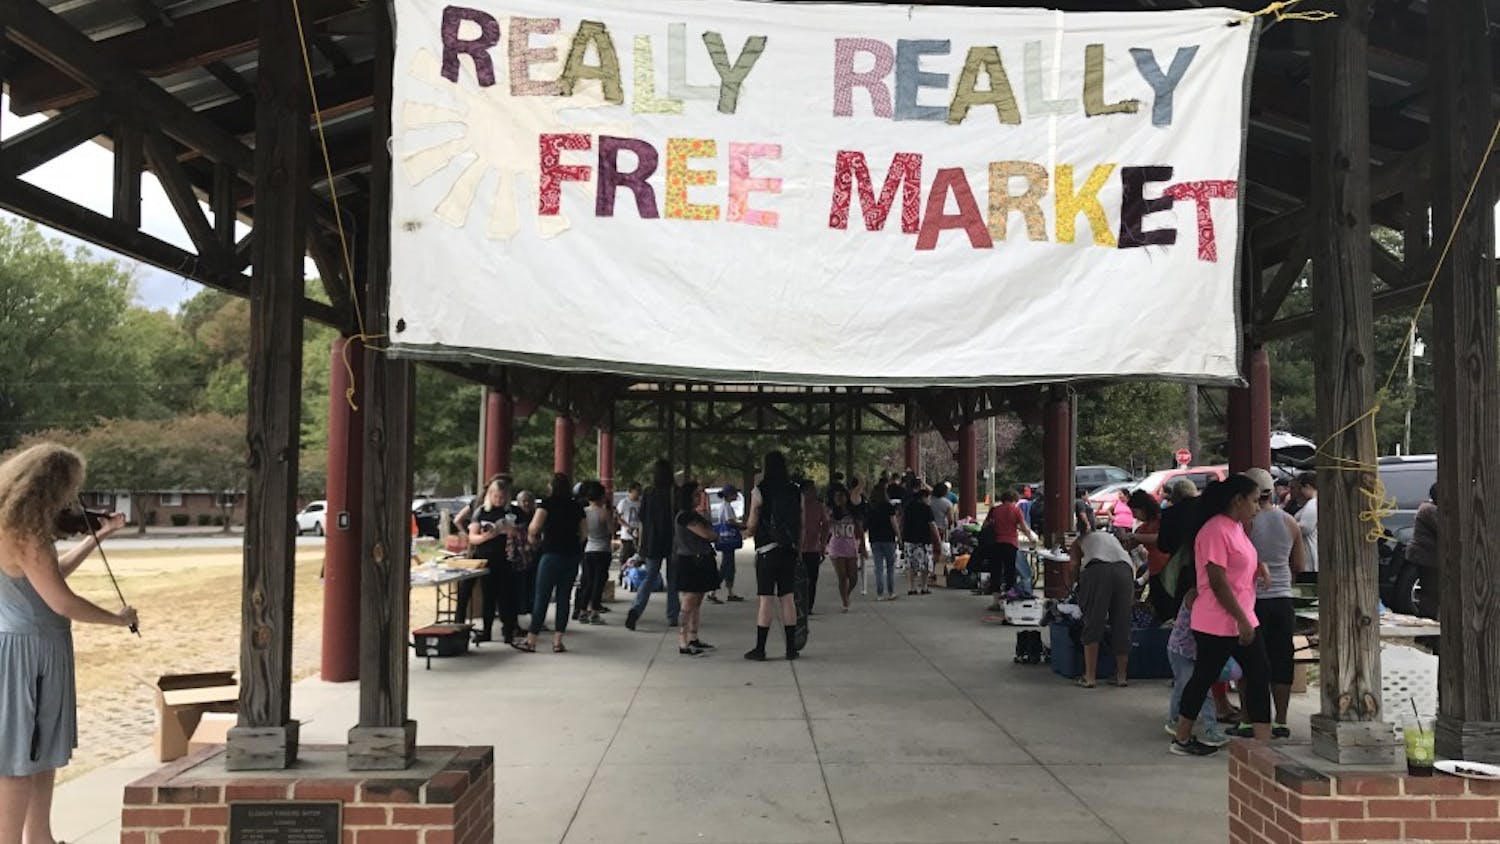 The Really Really Free Market, an anti-capitalist event, held its monthly gathering on Saturday, marking thirteen years in Carrboro.